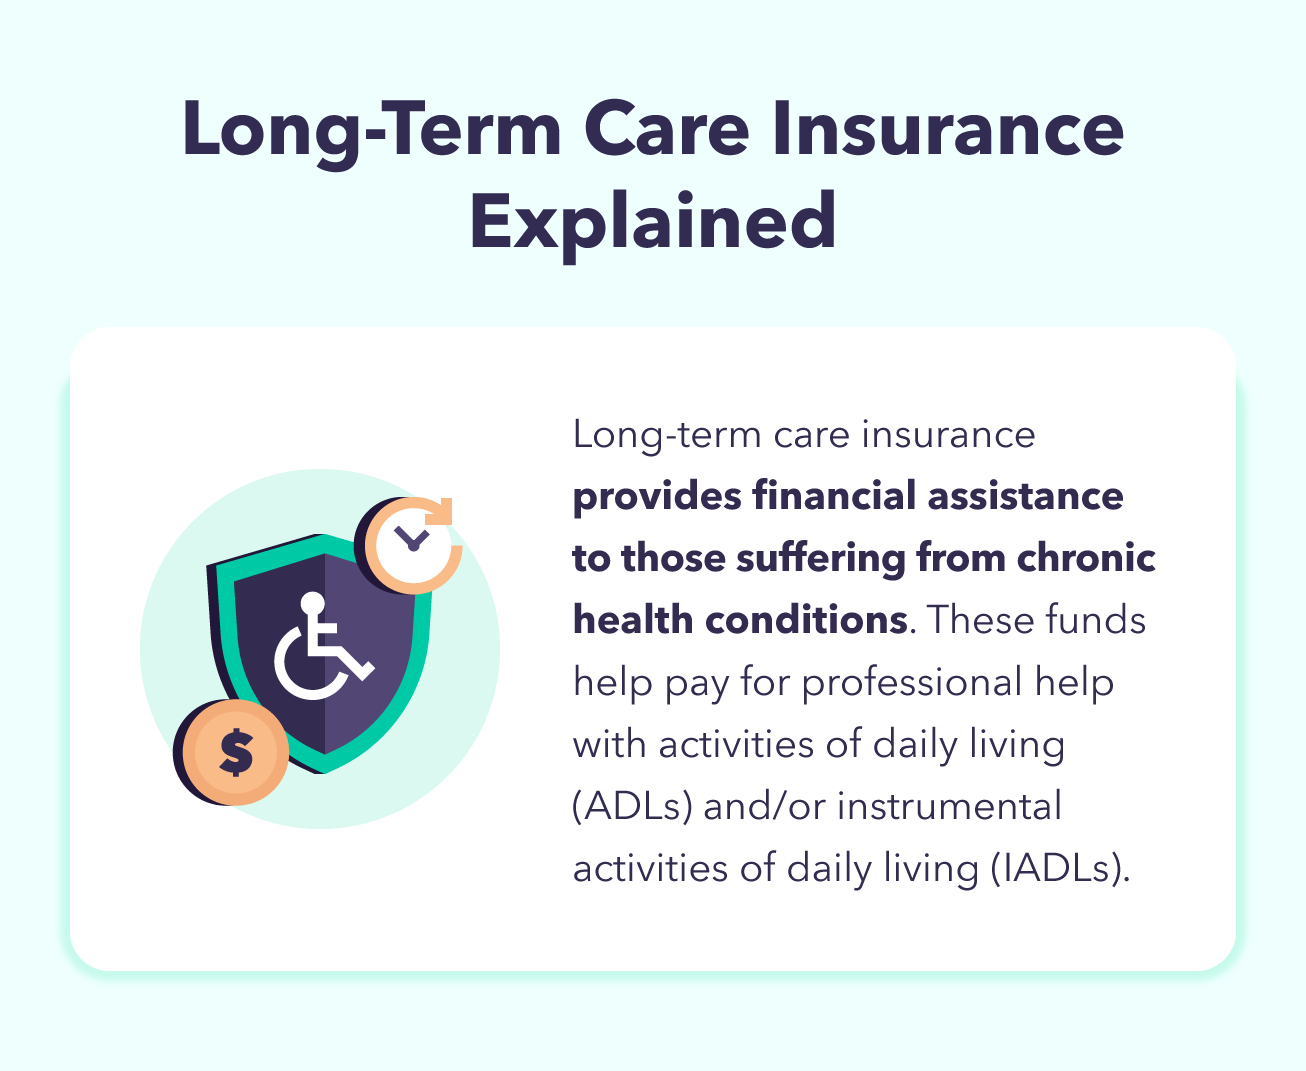 A definition explains what’s included in long-term care insurance policies.